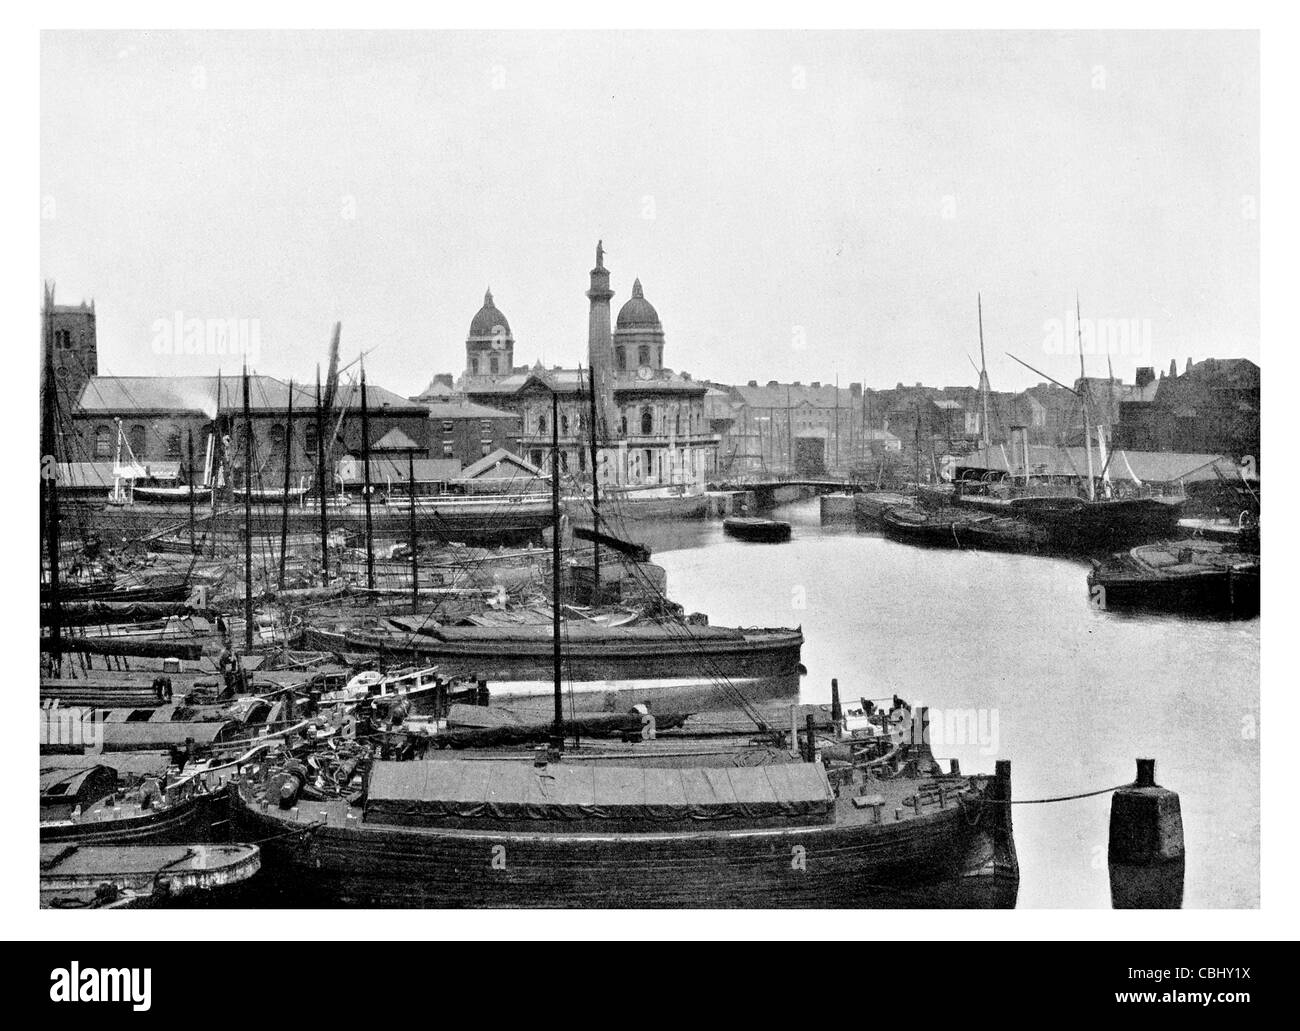 Kingston upon Hull Prince's Dock Wilberforce memorial and dock offices Pier Yorkshire England River Humber estuary industry Stock Photo